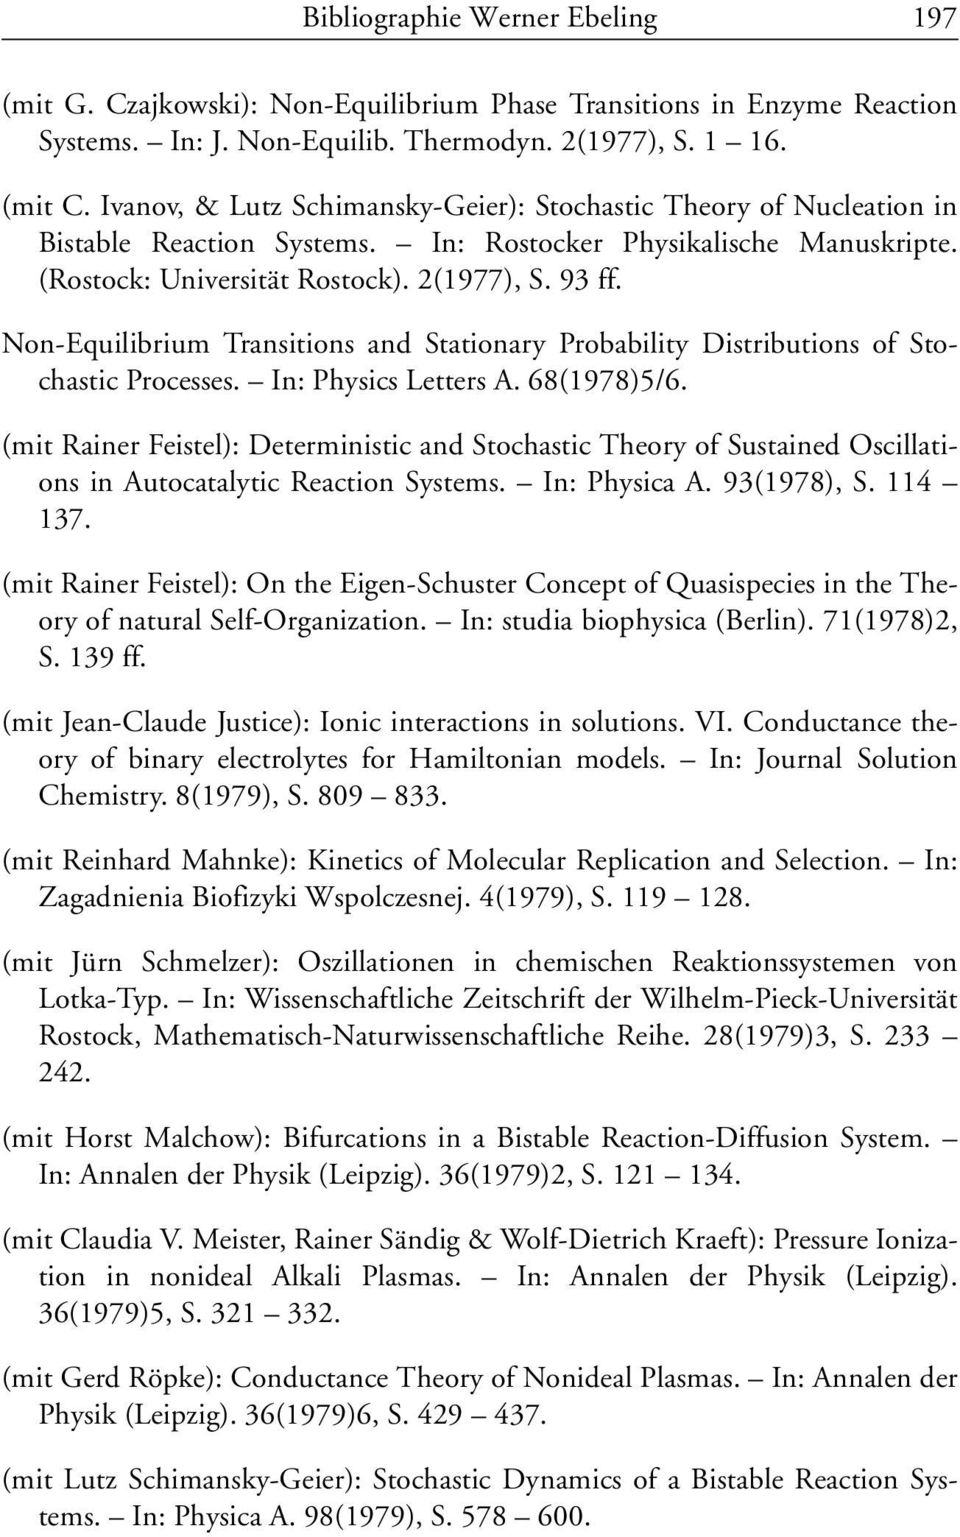 Non-Equilibrium Transitions and Stationary Probability Distributions of Stochastic Processes. In: Physics Letters A. 68(1978)5/6.